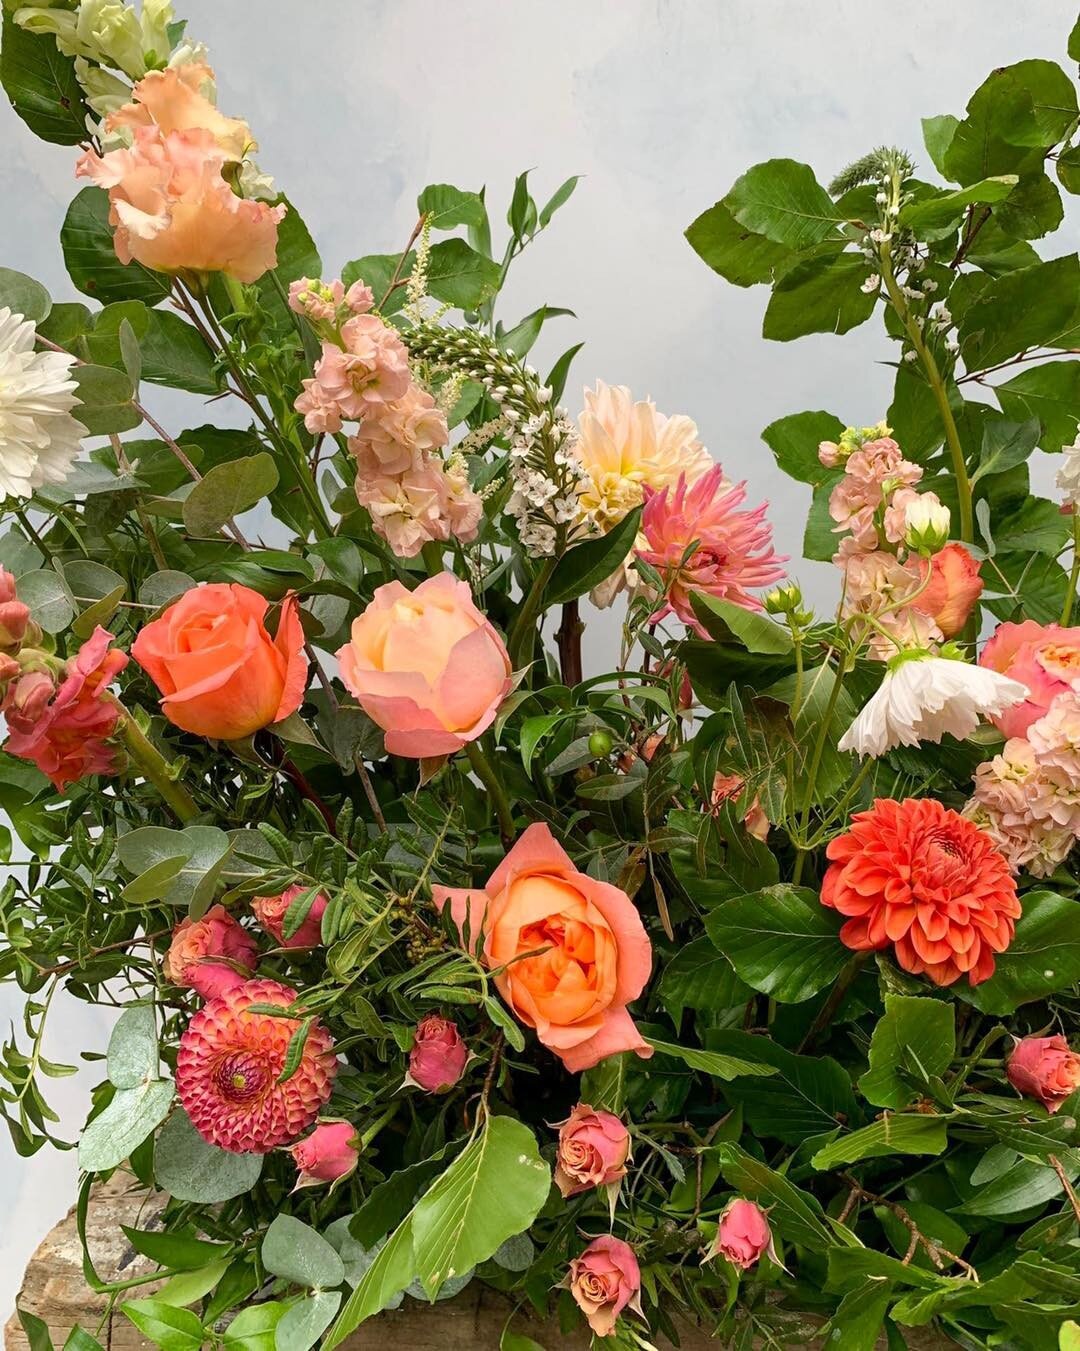 Rose and dahlia heaven!! Just loving this pop of rich pinks and oranges 😍 So summery! 

#weddingideas #wedding2023 #wedding2022 #weddinginspiration #weddingflowers #haslemerebrides #surreybride #surreyflorist #surreyweddingflorist #surreyweddingflow